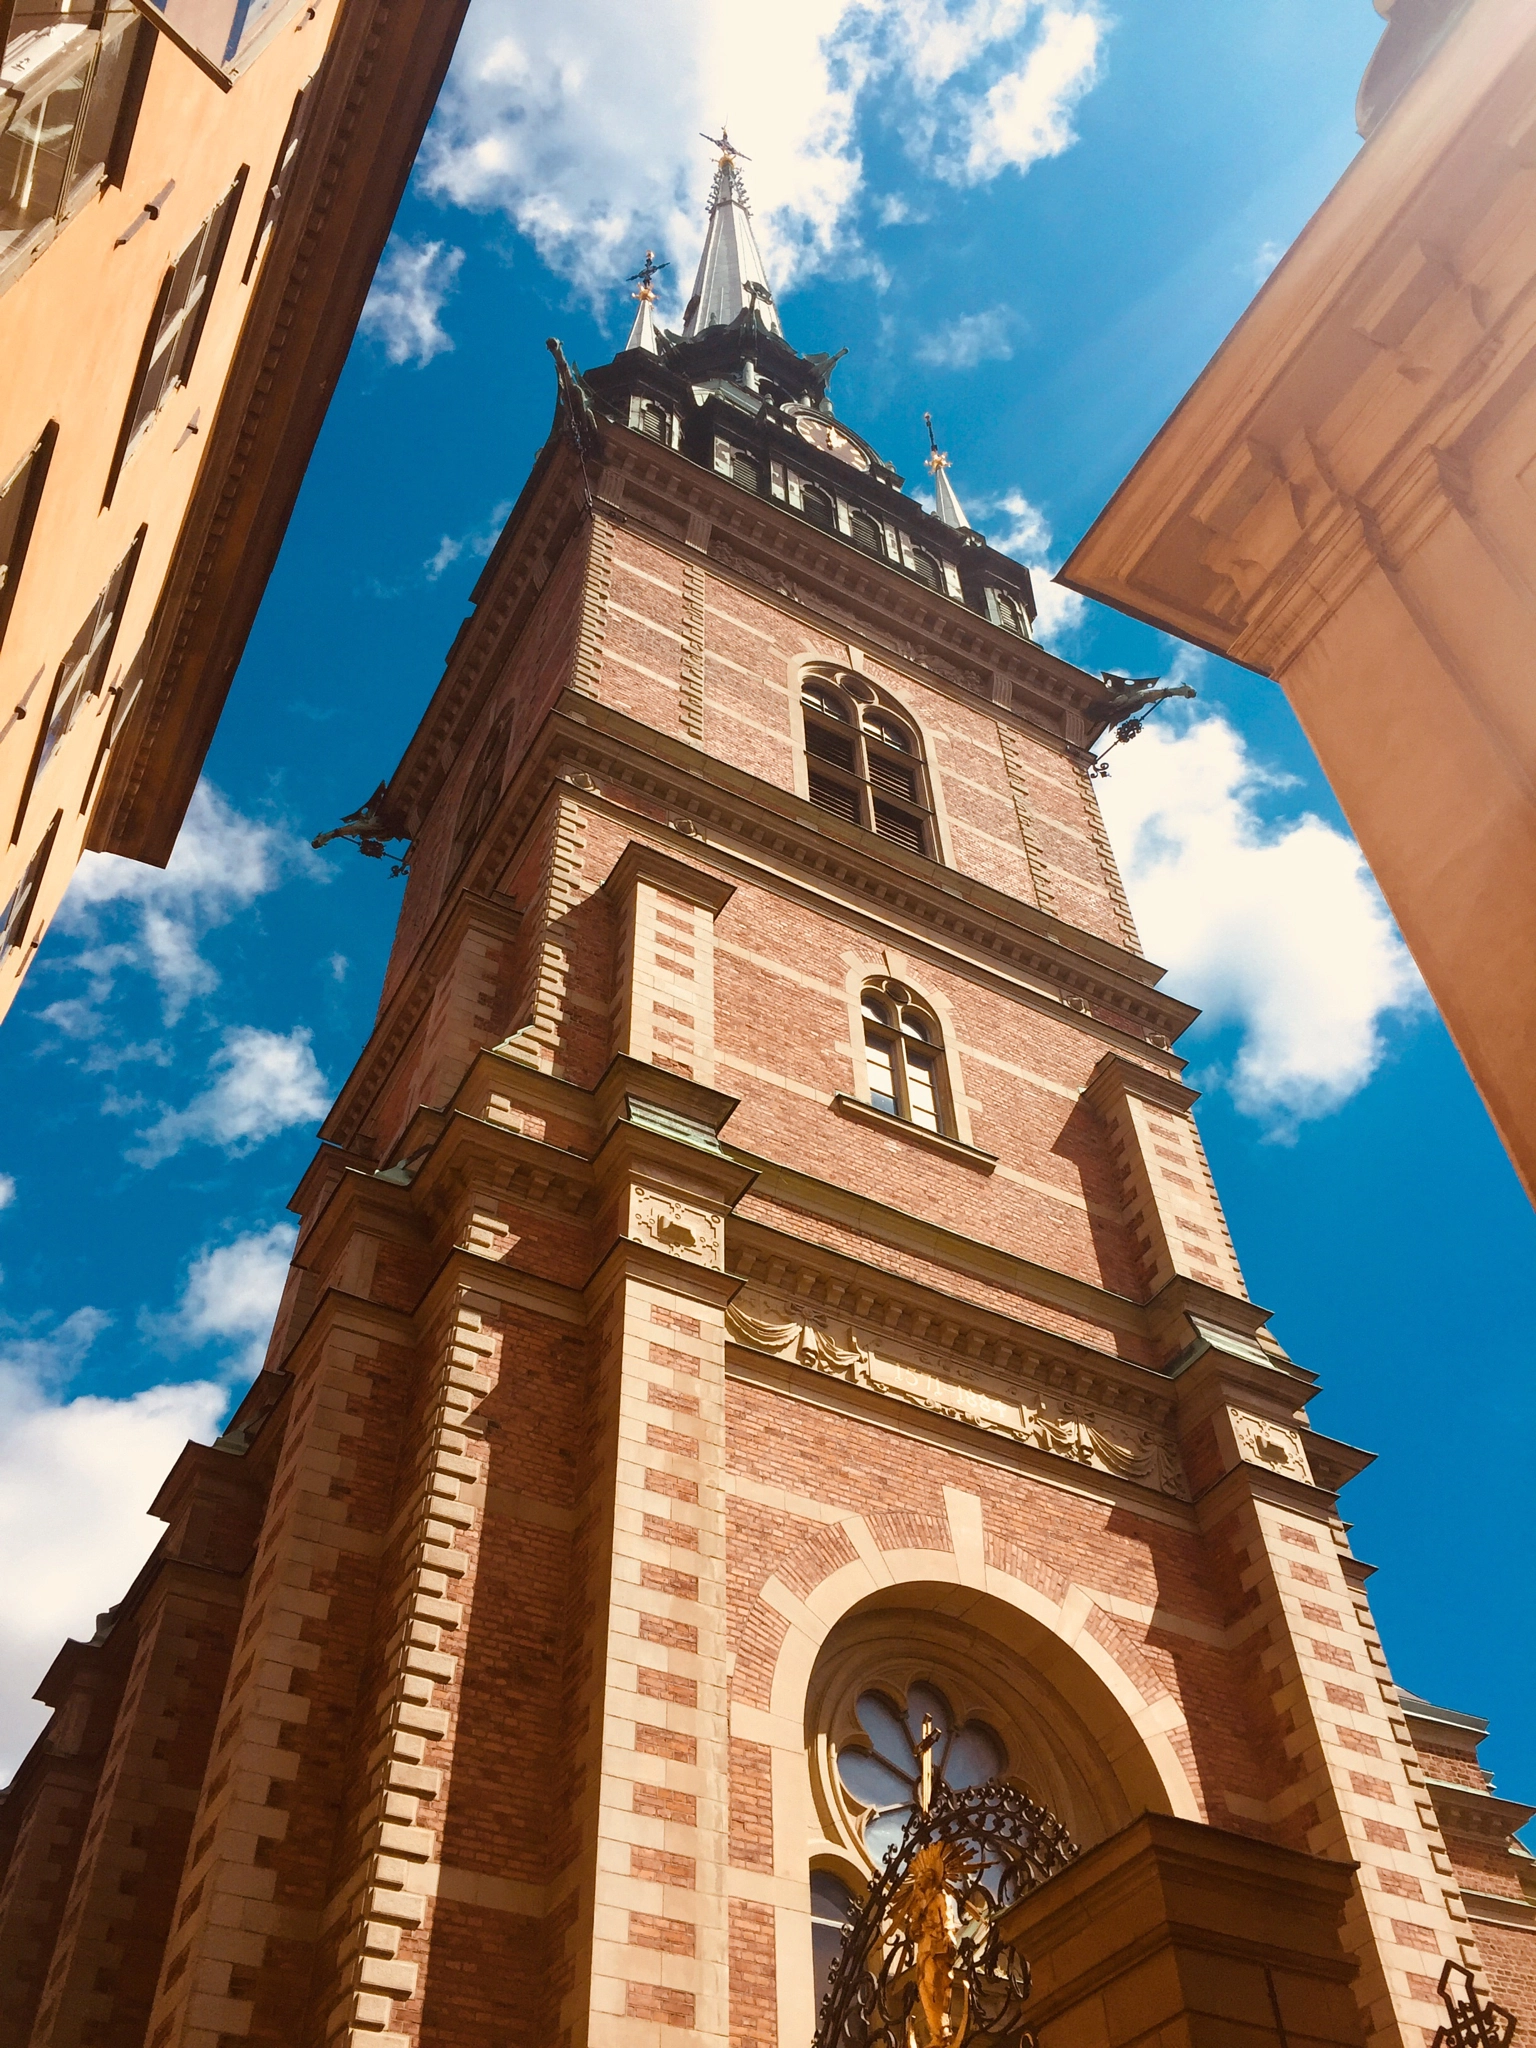 The German Church - Old Town, Stockholm